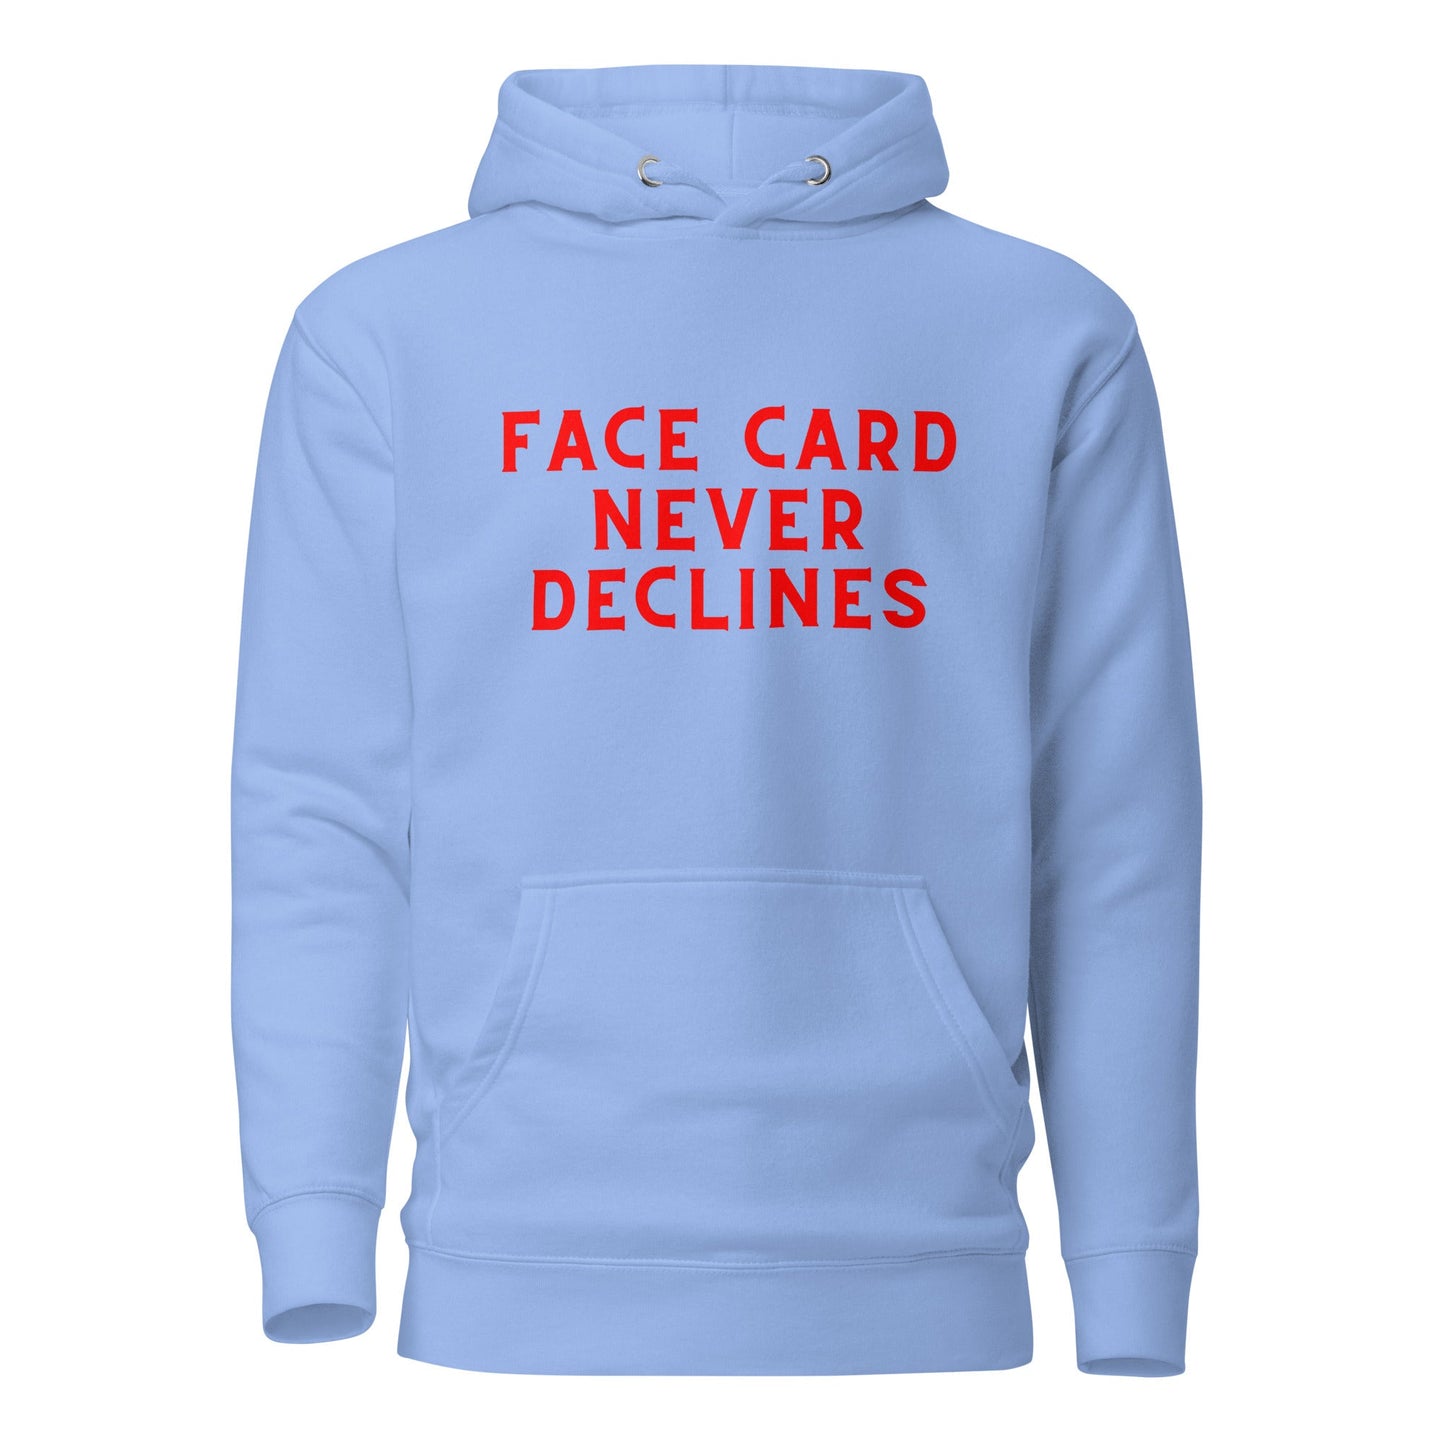 Face card never declines! Unisex Hoodie - Catch This Tea Shirts